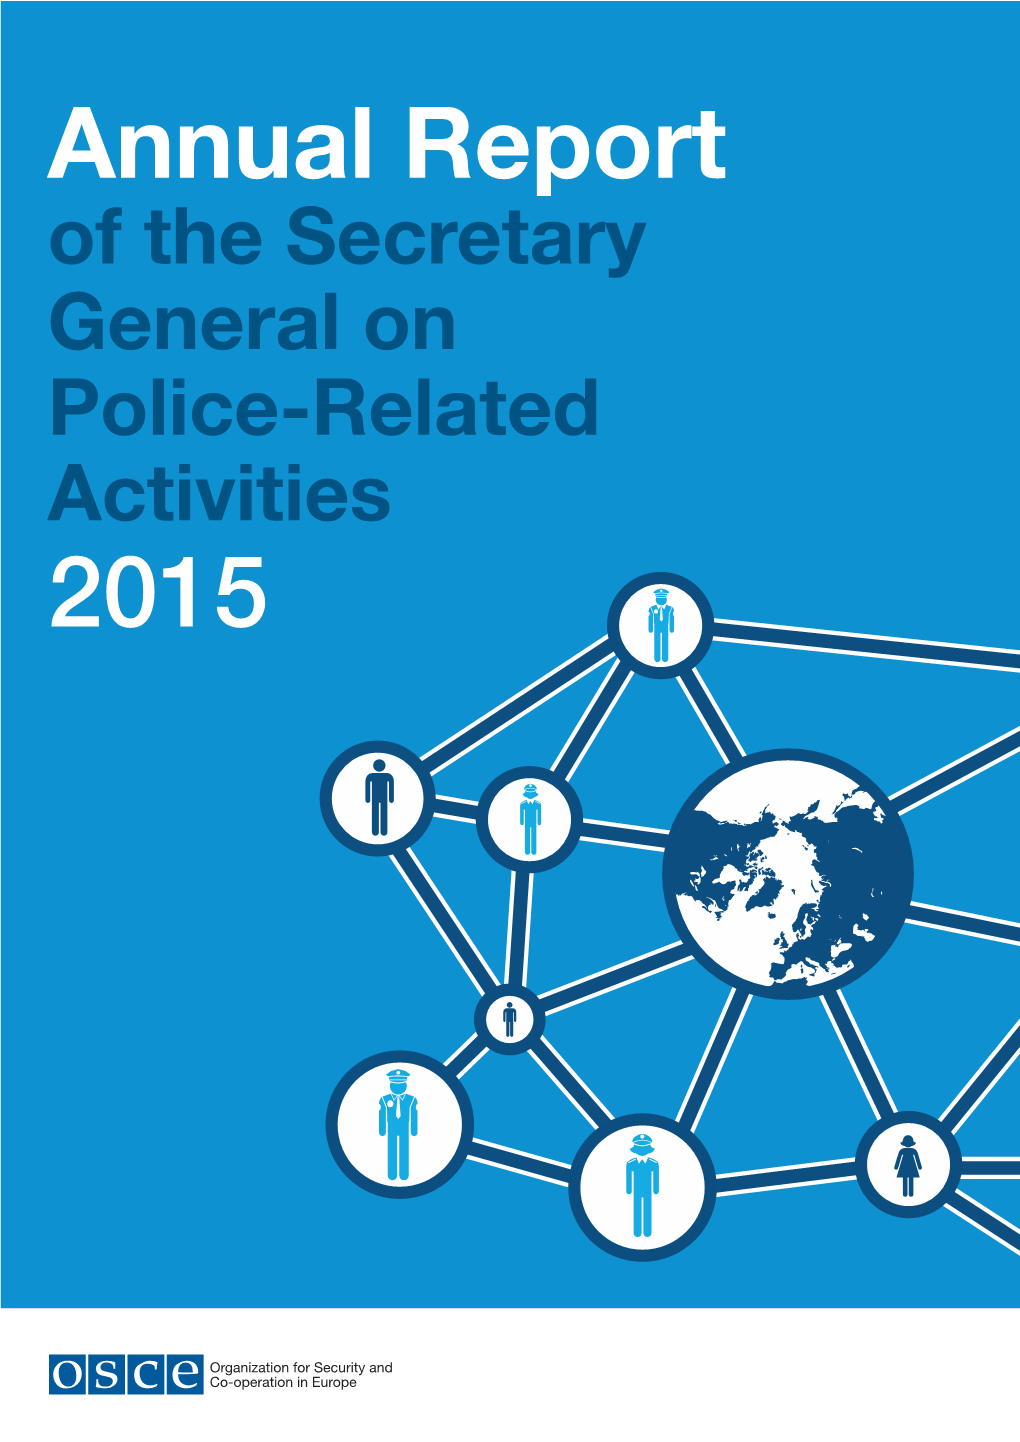 Annual Report of the Secretary General on Police-Related Activities 2015